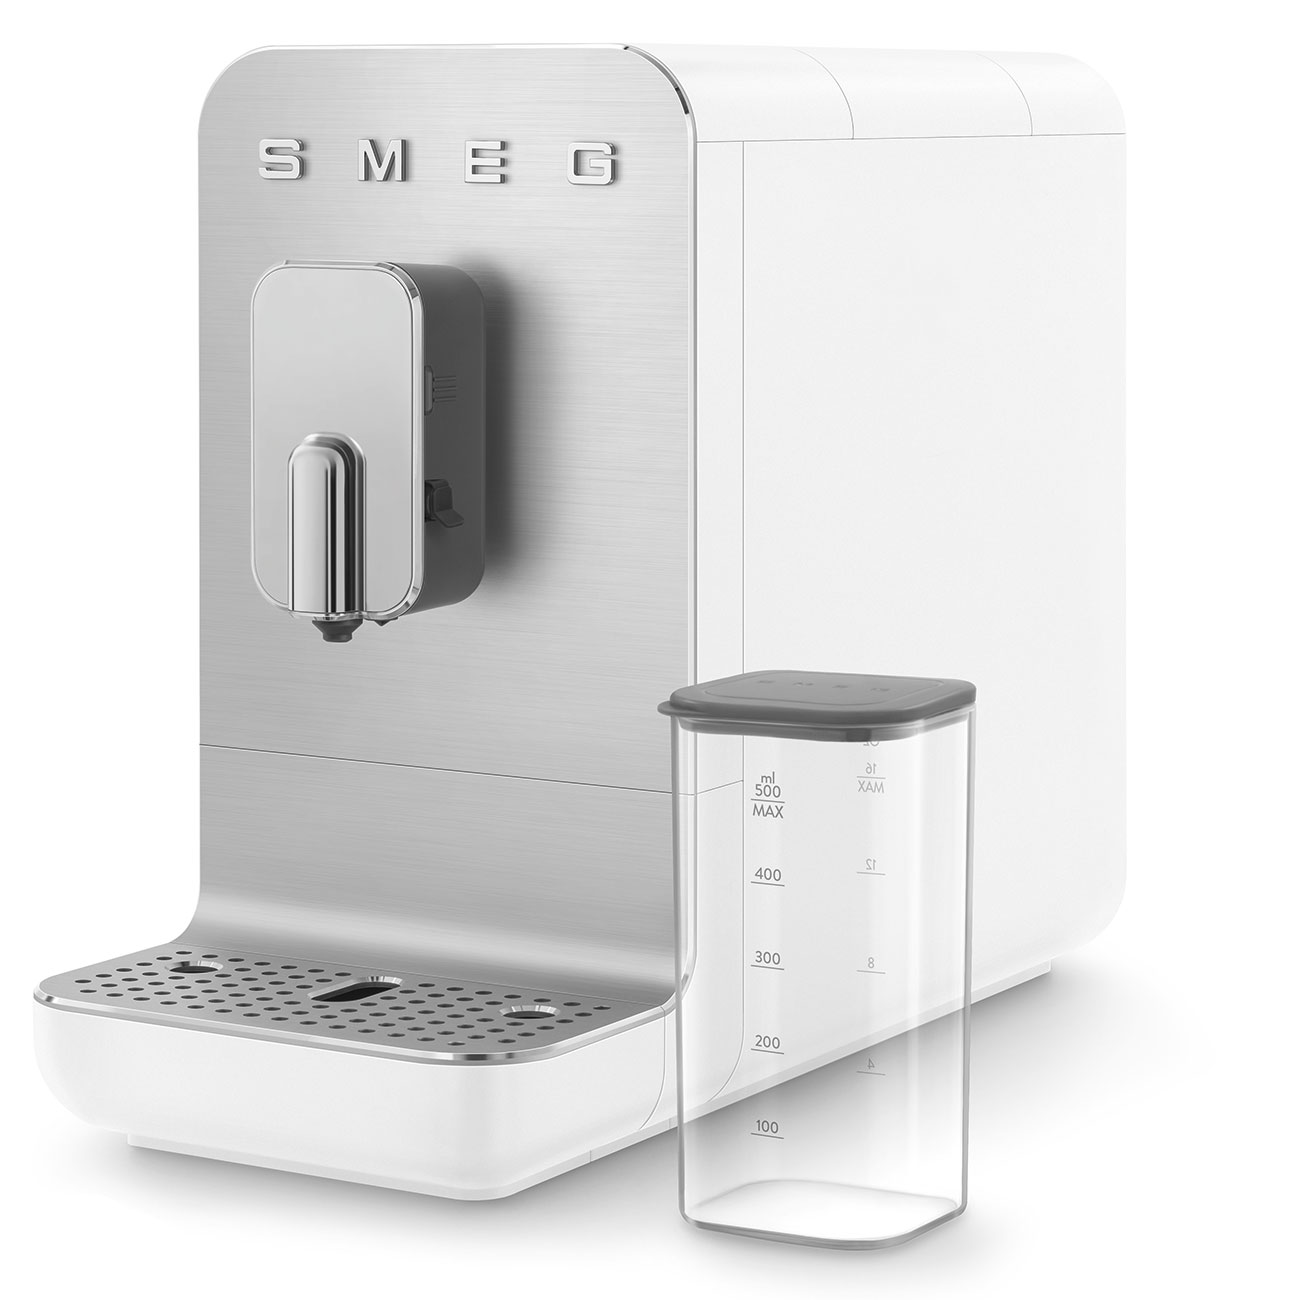 Smeg White Bean To Cup Coffee Machine with integrated milk tank_11